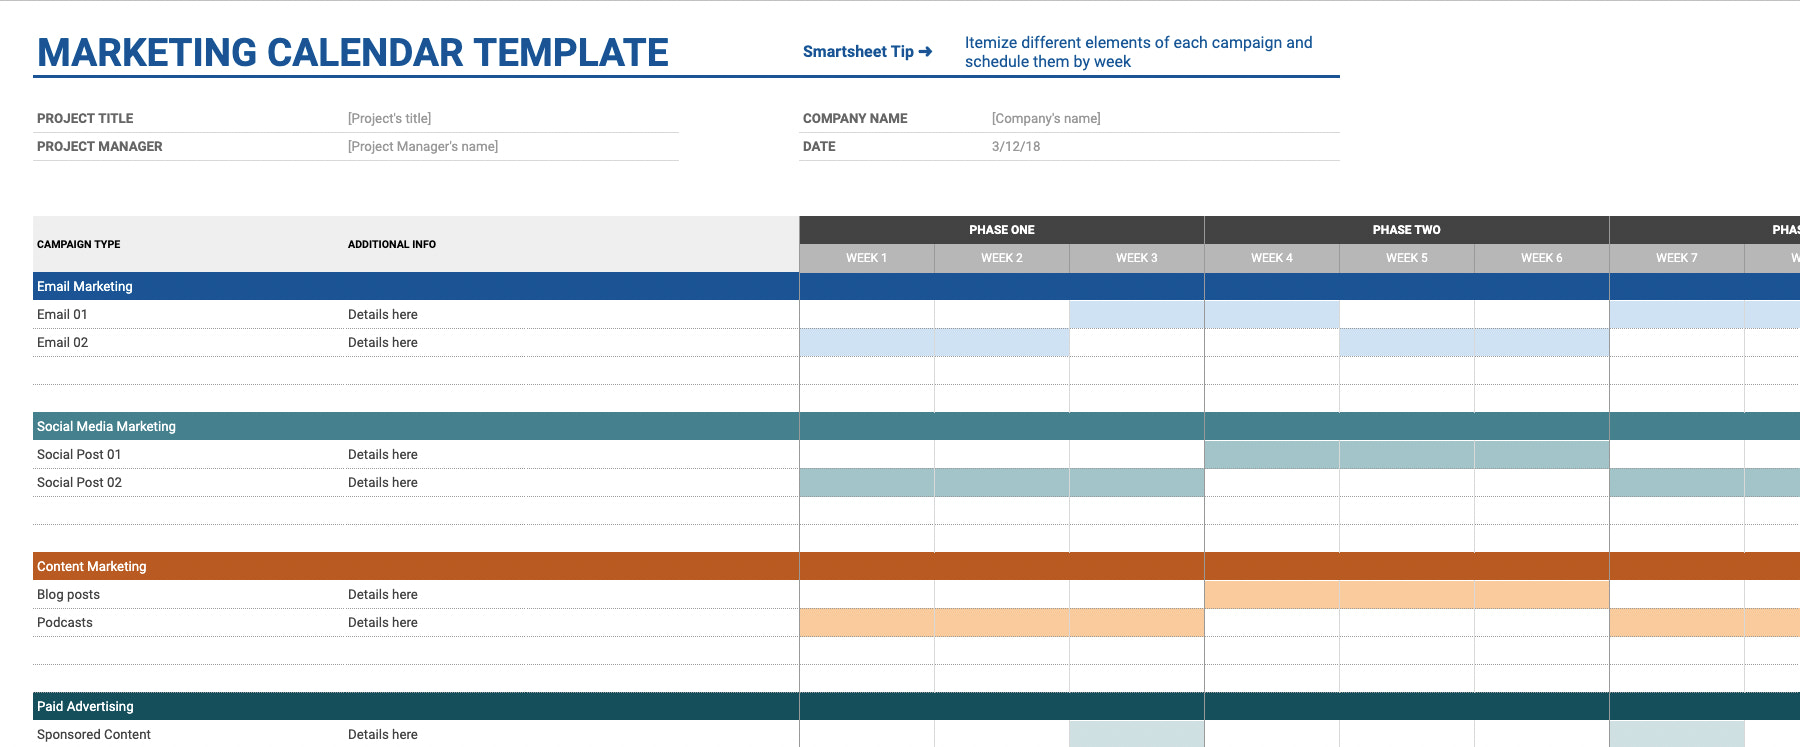 How To Build A Marketing Calendar That Actually Works